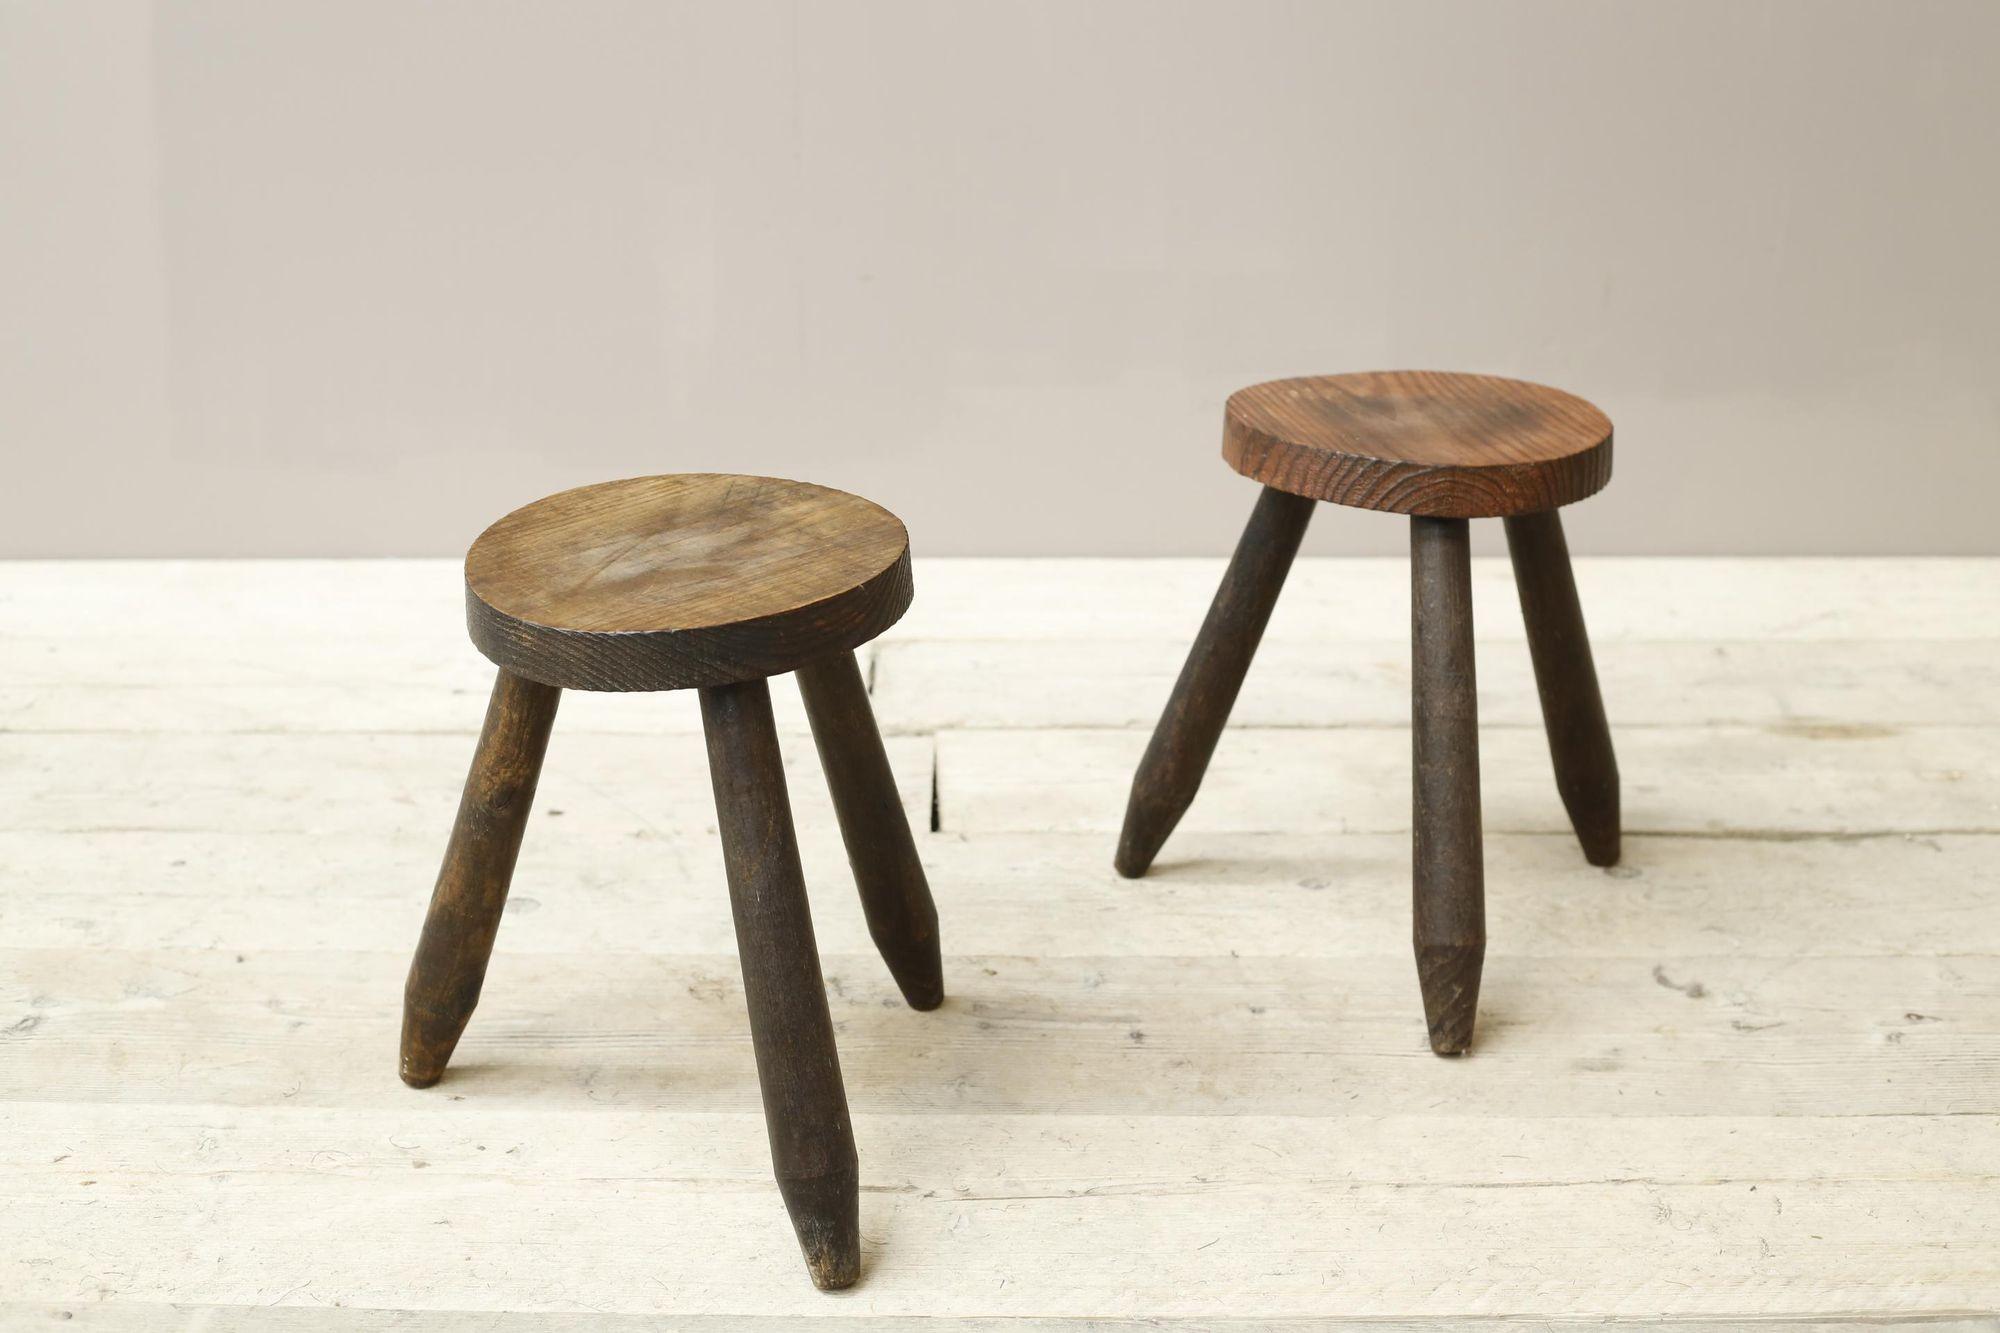 These are a great looking pair of rustic French stools that made ideal side tables. Simply made but designed well so easy to place. The tops are single pieces and do have a slight irregular nature to them but all perfectly fine for use for a mug or